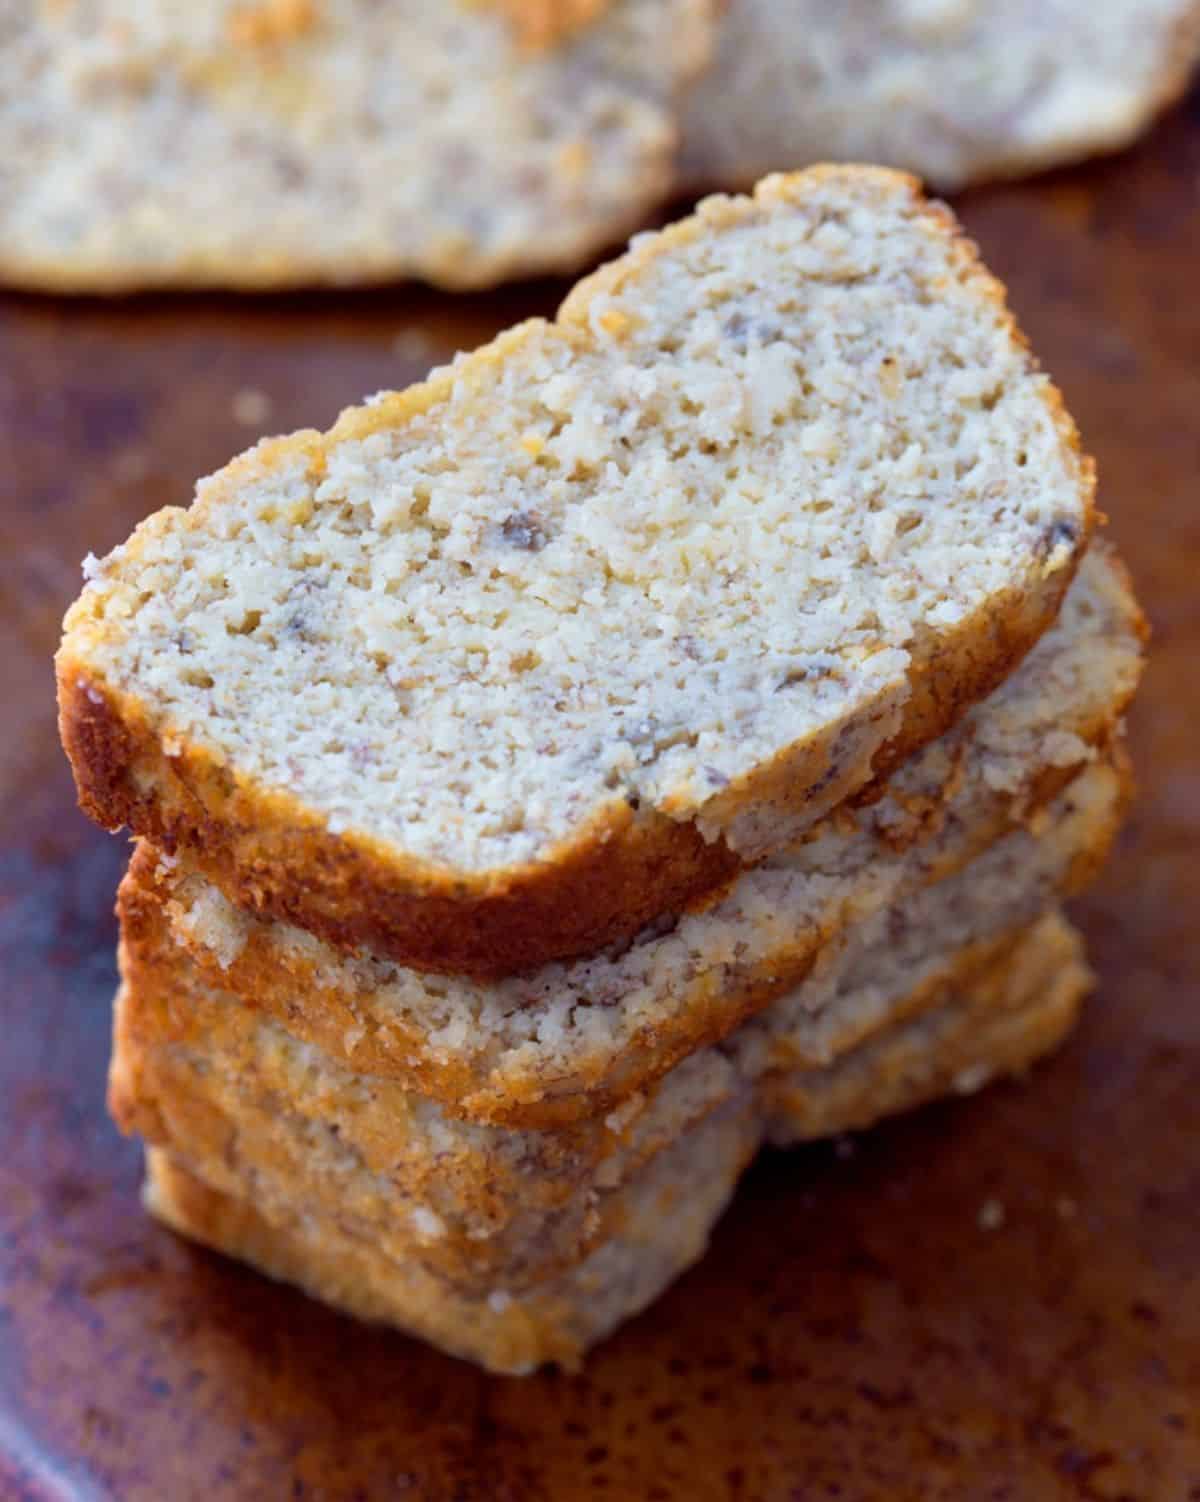 A pile of sliced Low-Carb Almond Flour Banana Bread.